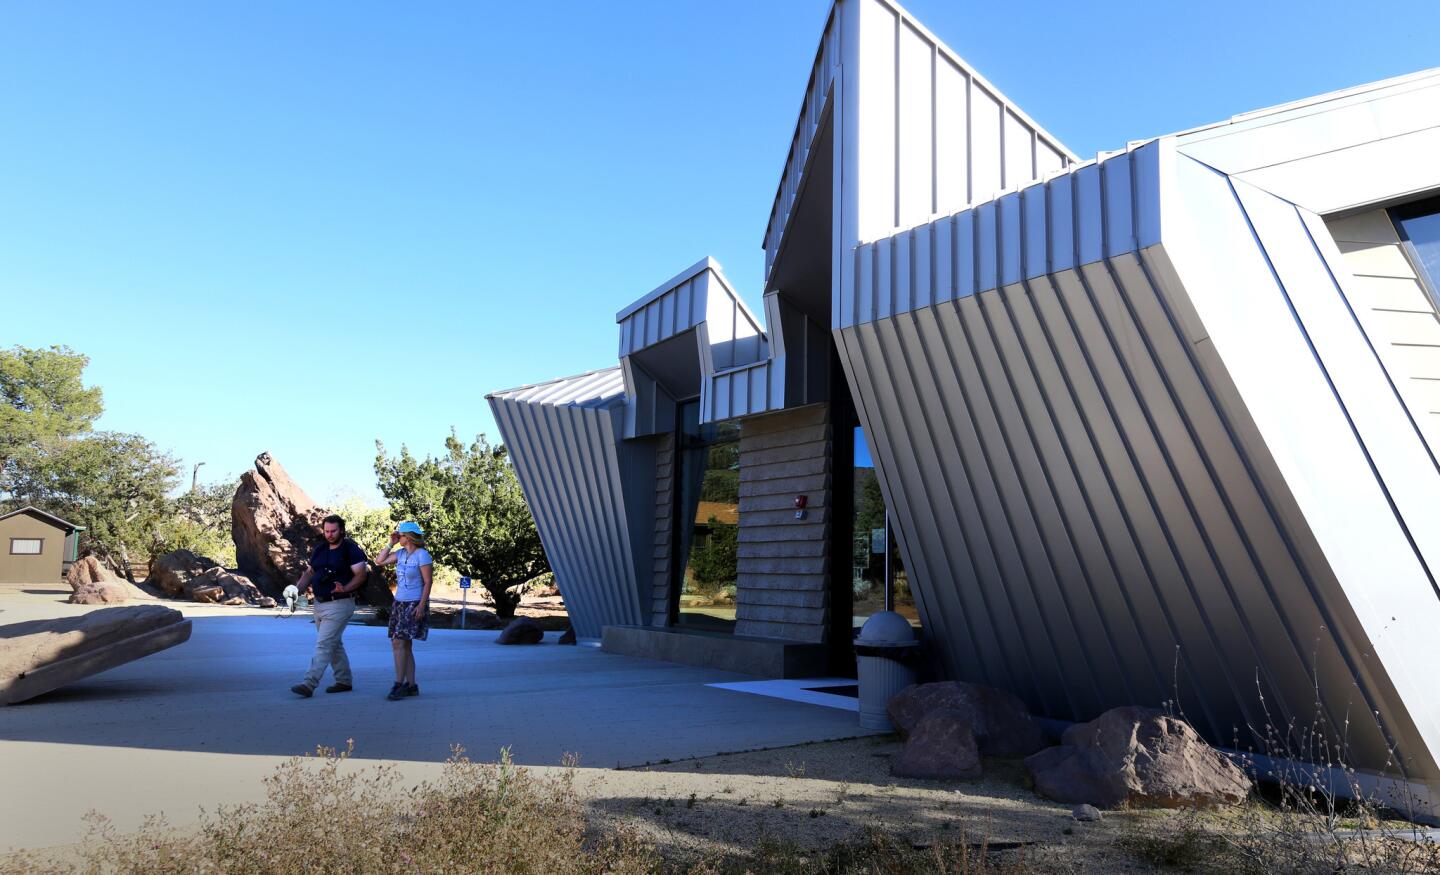 The Interpretive Center, off the main parking lot, by the entrance to Vasquez Rocks Natural Area Park.